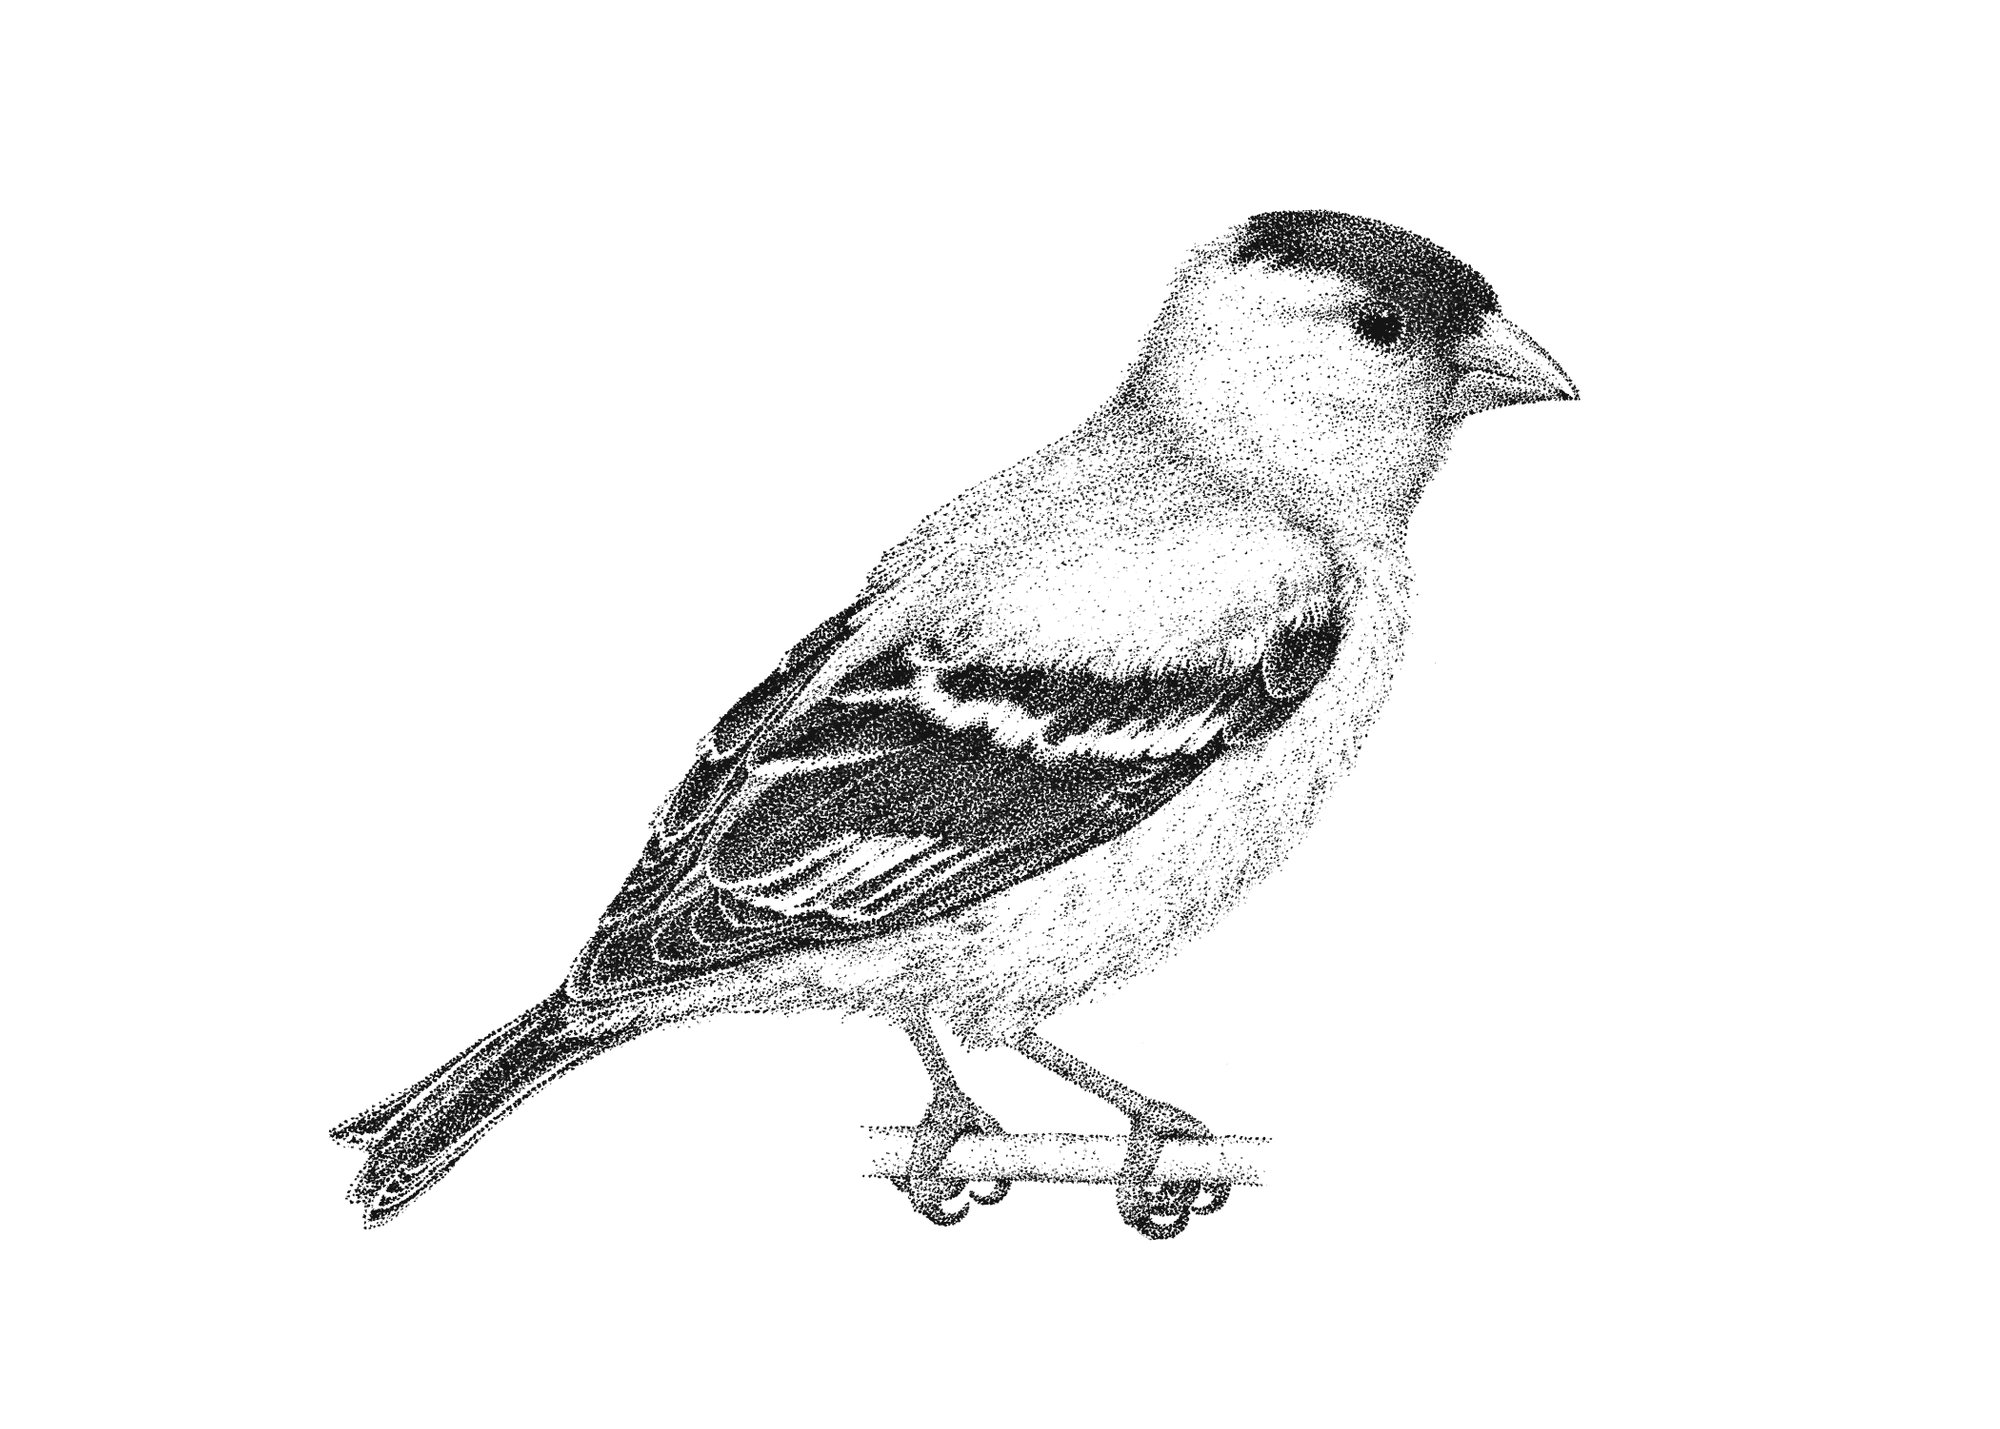 Finch Drawing